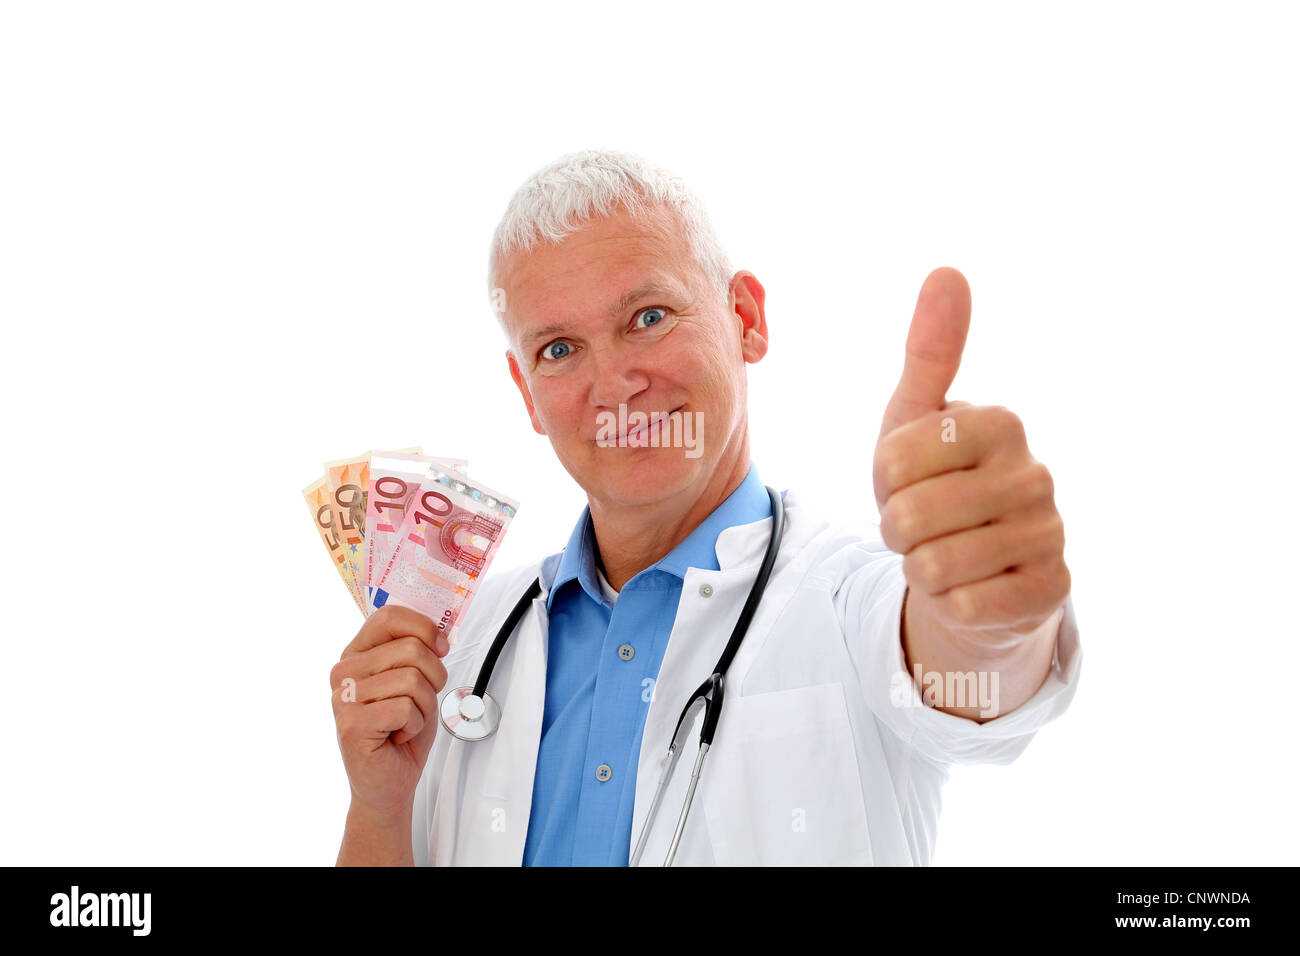 Smiling Doctor with money, stethoscope and thump up Stock Photo